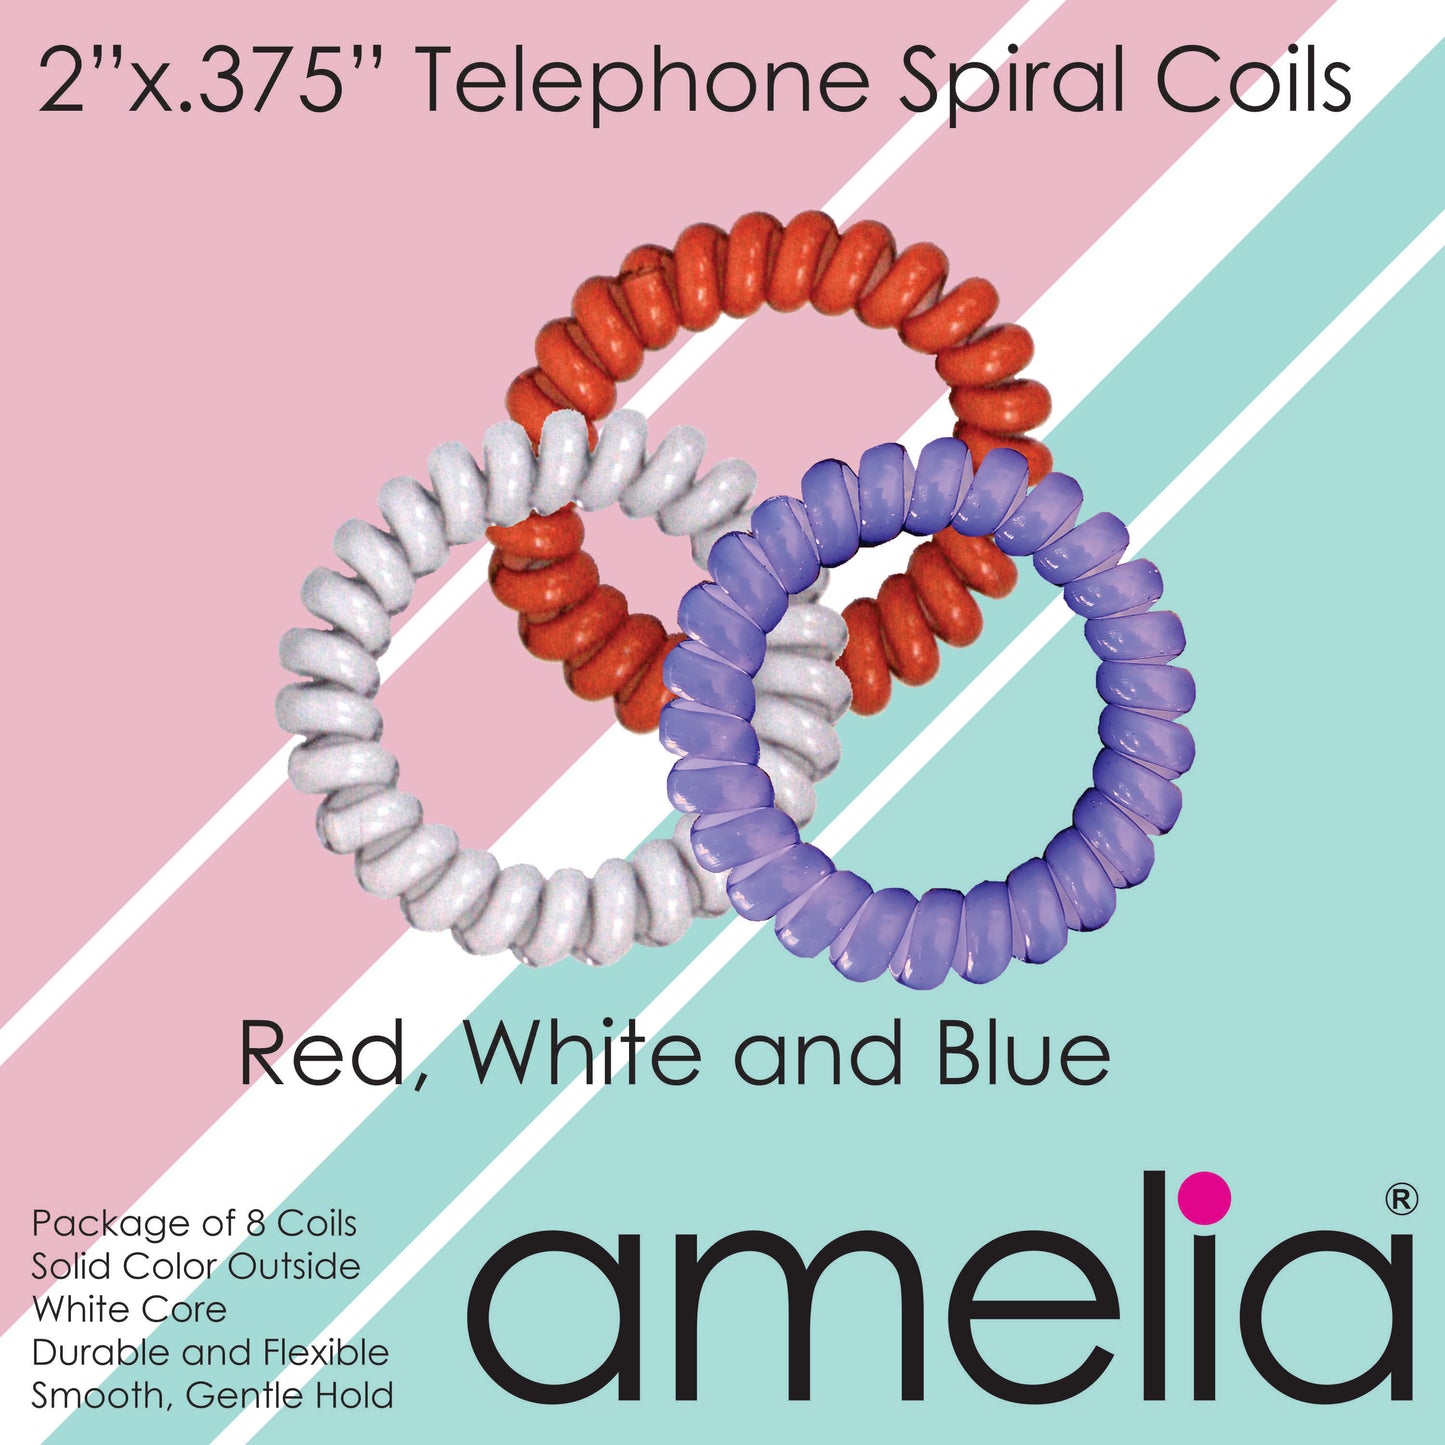 Amelia Beauty Products 8 Medium Elastic Hair Coils, 2.0in Diameter Thick Spiral Hair Ties, Gentle on Hair, Strong Hold and Minimizes Dents and Creases, Red, White and Blue Mix